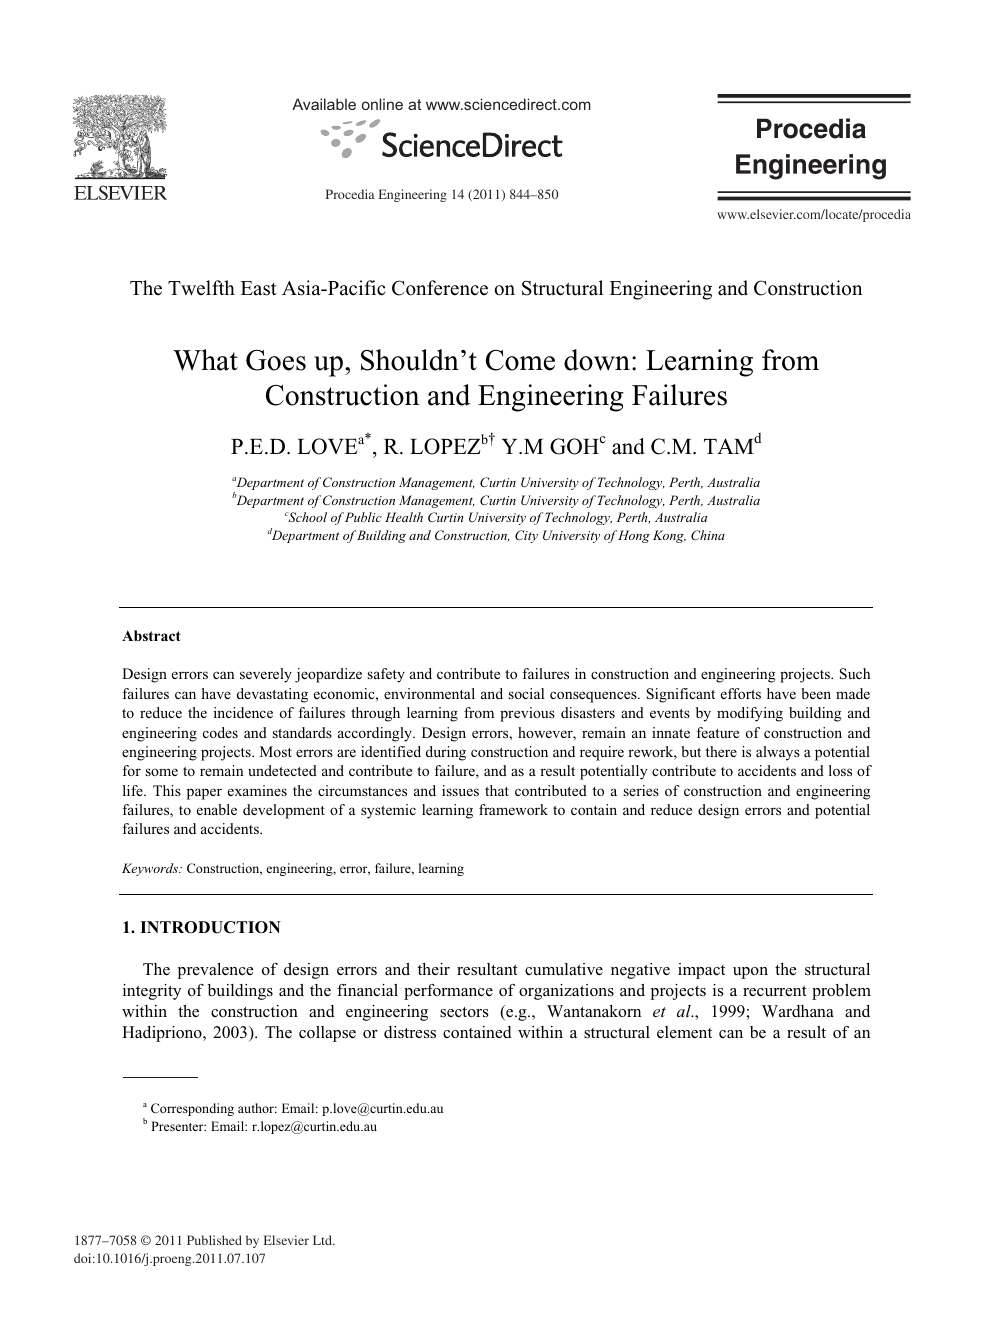 What Goes Up Shouldn T Come Down Learning From Construction And Engineering Failures Topic Of Research Paper In Civil Engineering Download Scholarly Article Pdf And Read For Free On Cyberleninka Open Science